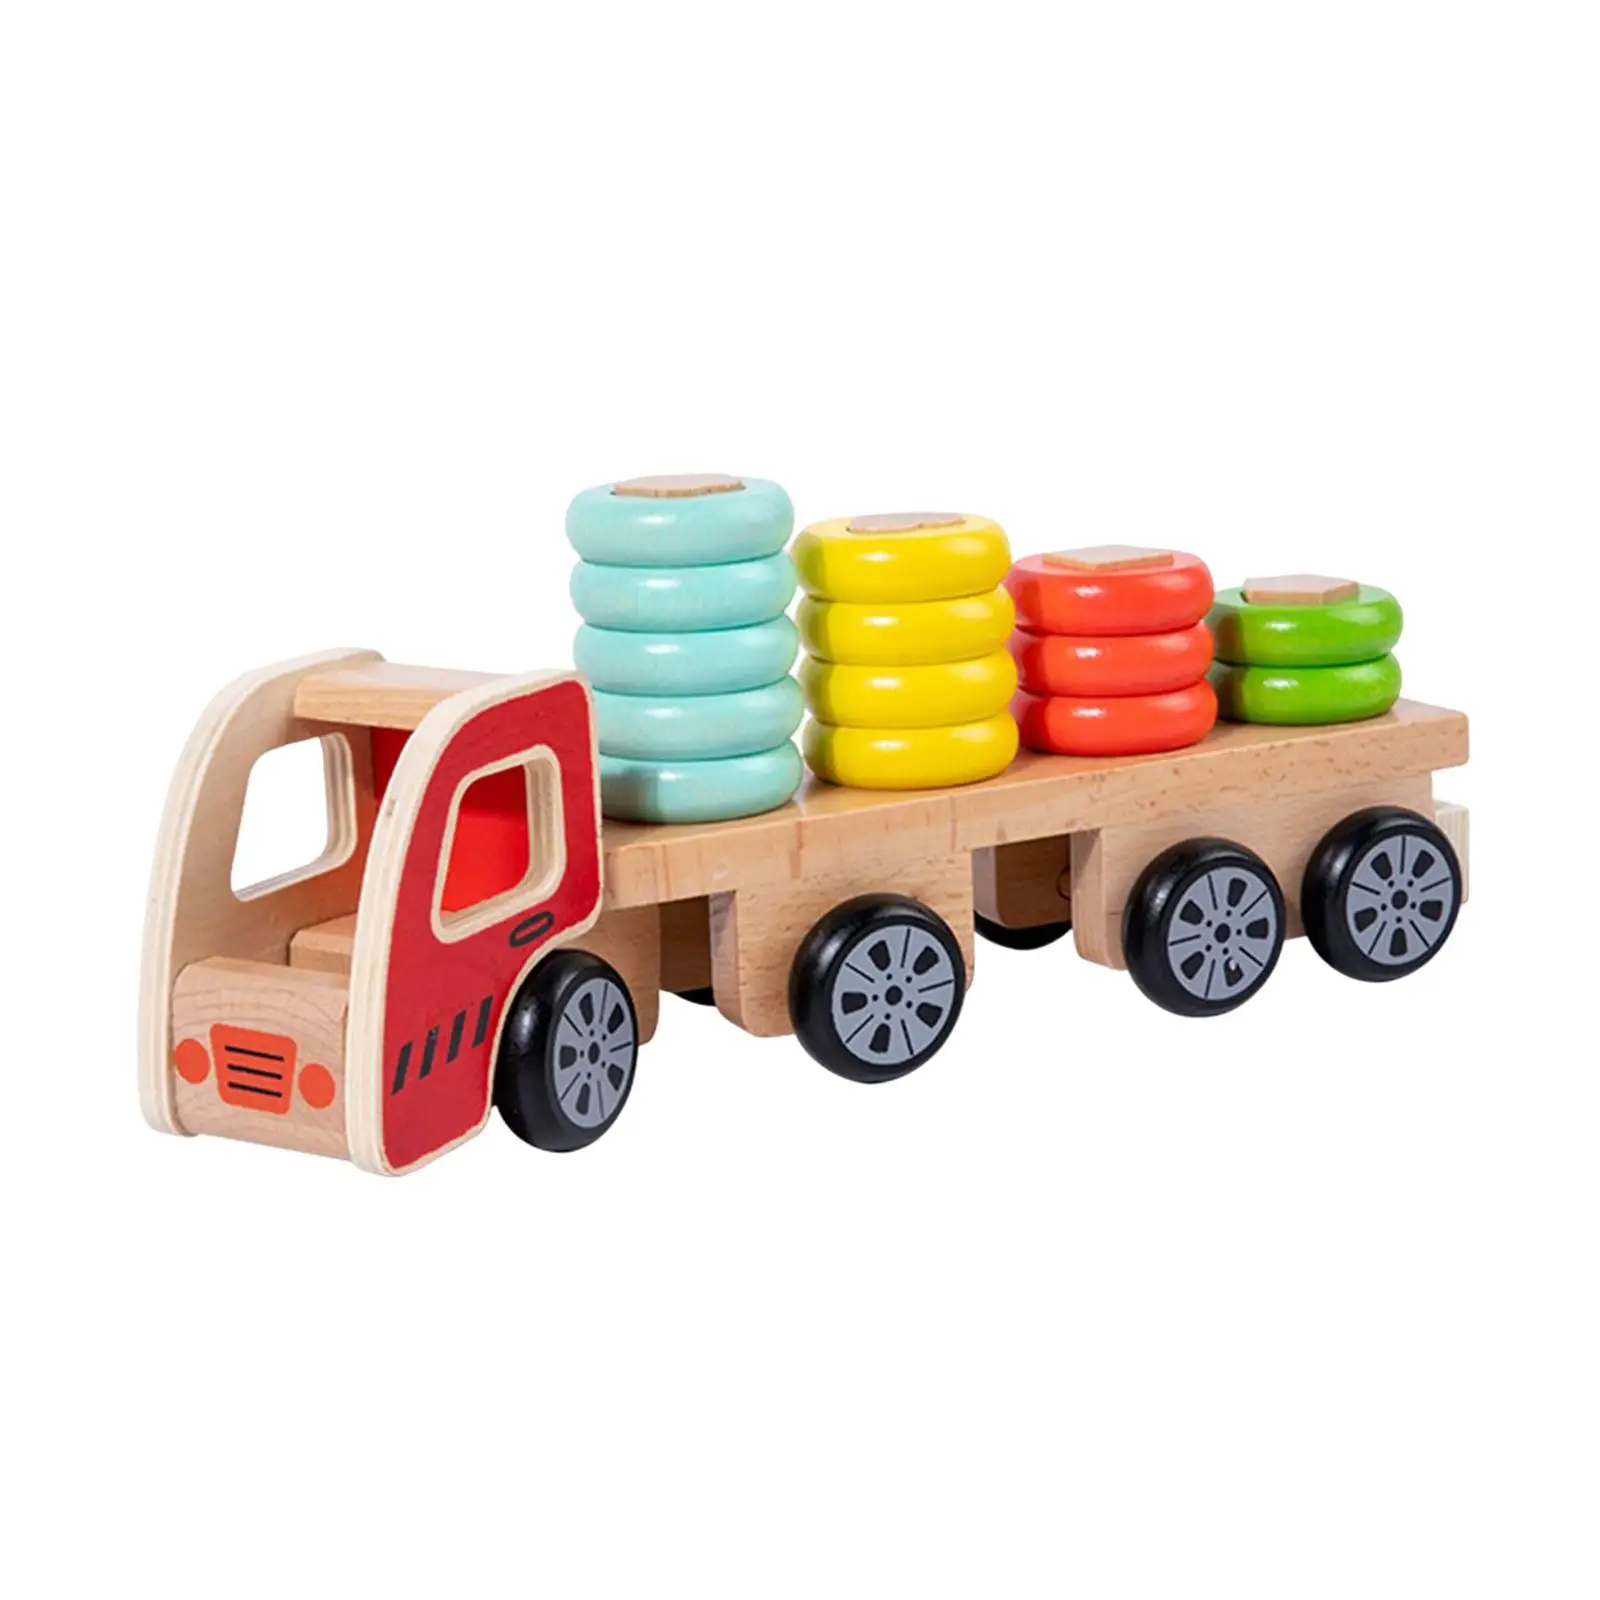 Wooden Sorting & Stacking Toys Wooden Stacking Train Shape Sorting Building Toys Pull Along Puzzle Kids for Toddlers Ages 2+